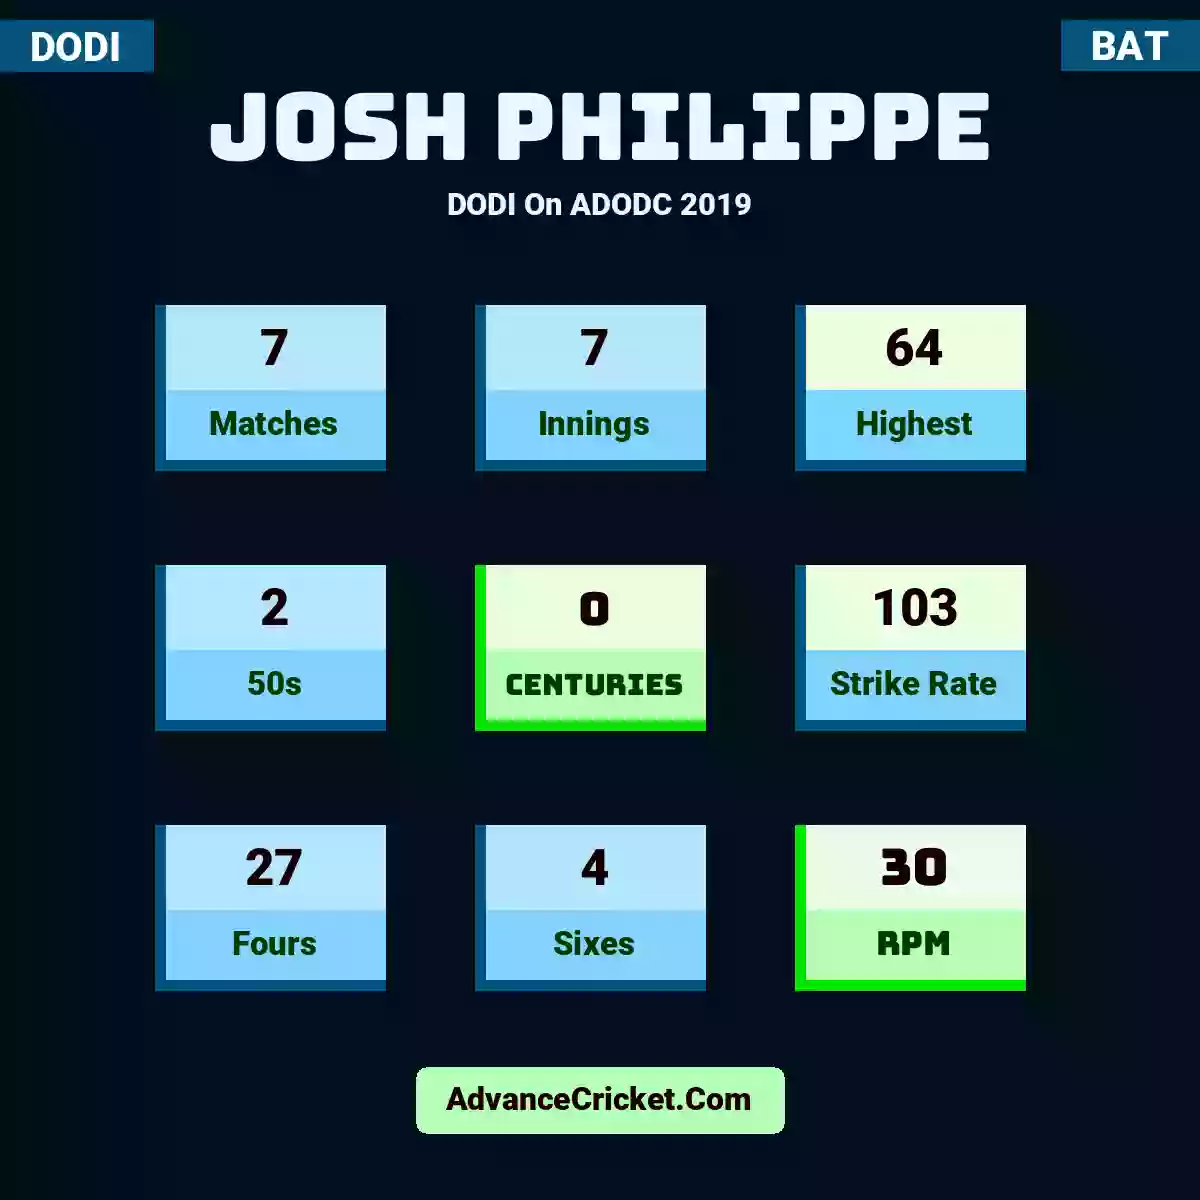 Josh Philippe DODI  On ADODC 2019, Josh Philippe played 7 matches, scored 64 runs as highest, 2 half-centuries, and 0 centuries, with a strike rate of 103. J.Philippe hit 27 fours and 4 sixes, with an RPM of 30.